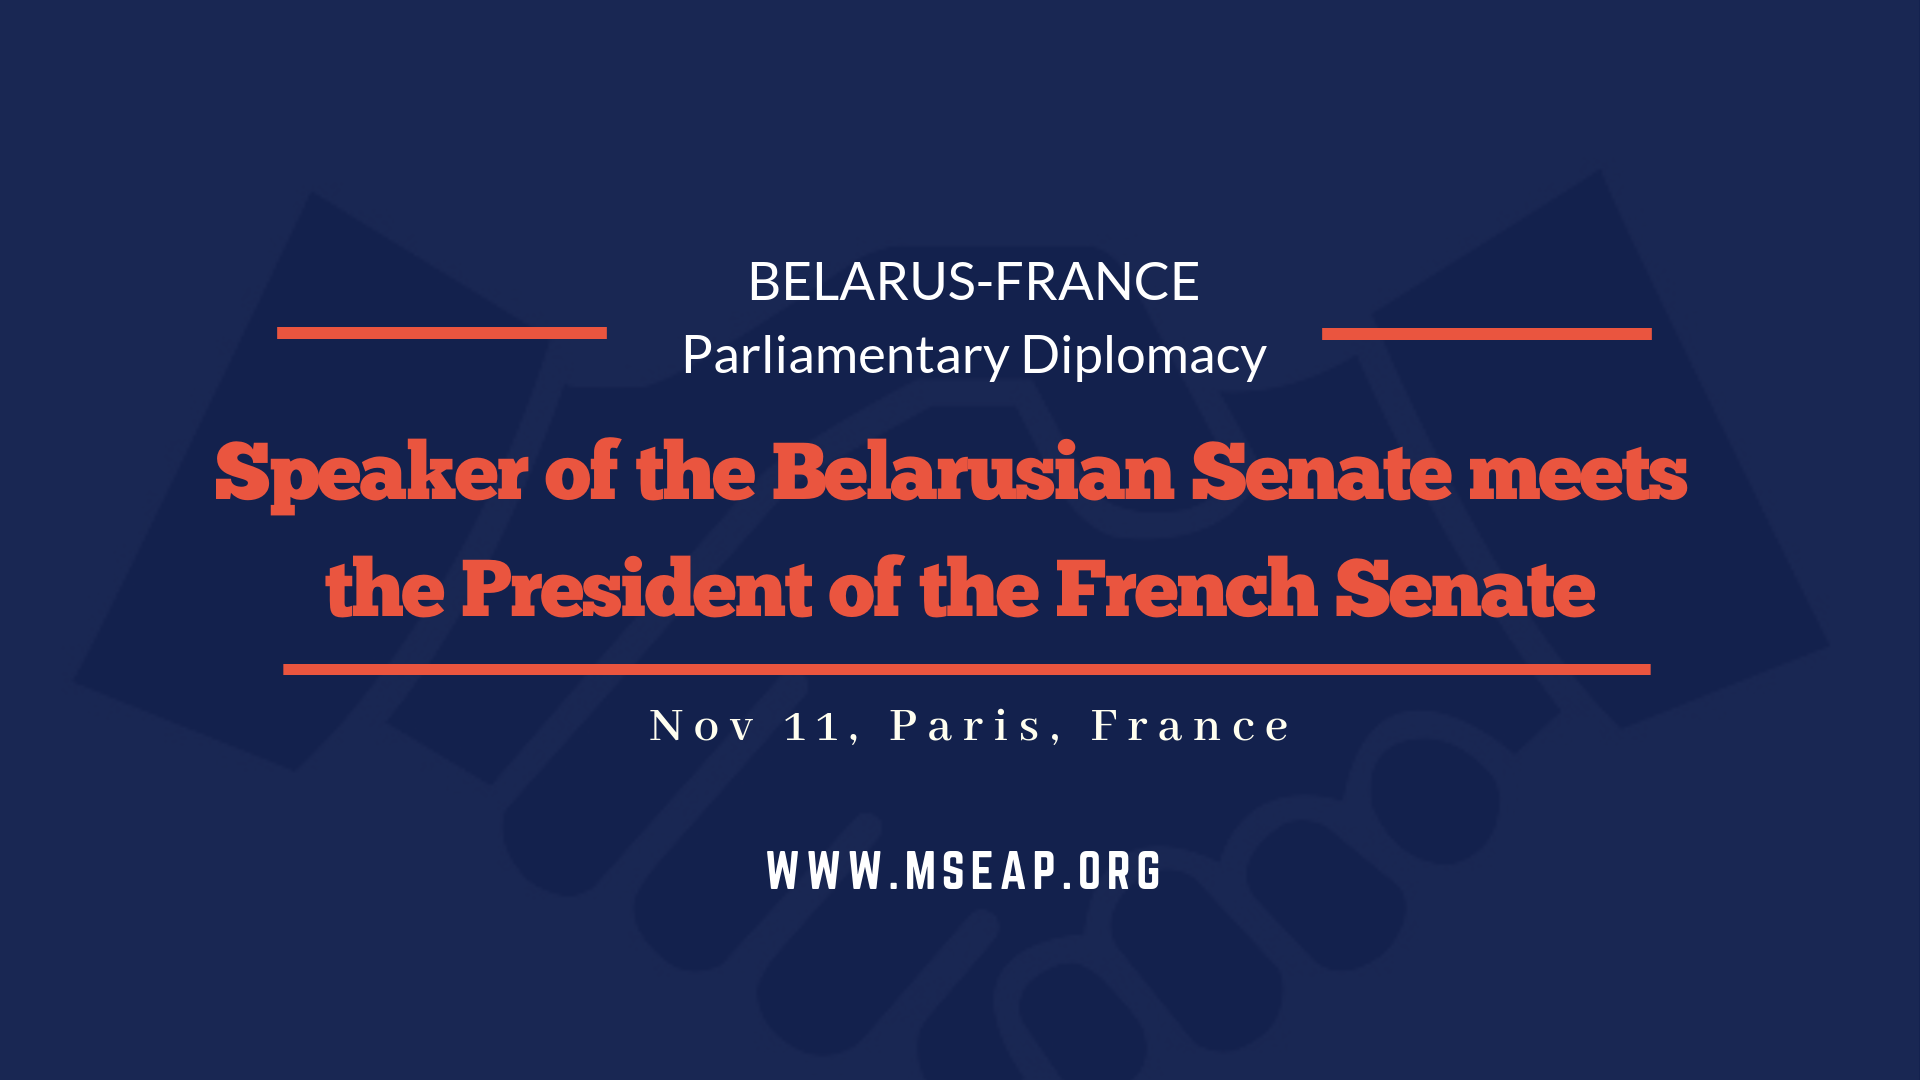 Speaker of the upper house of Berlarusian parliament meets the president of the French Senate in Paris